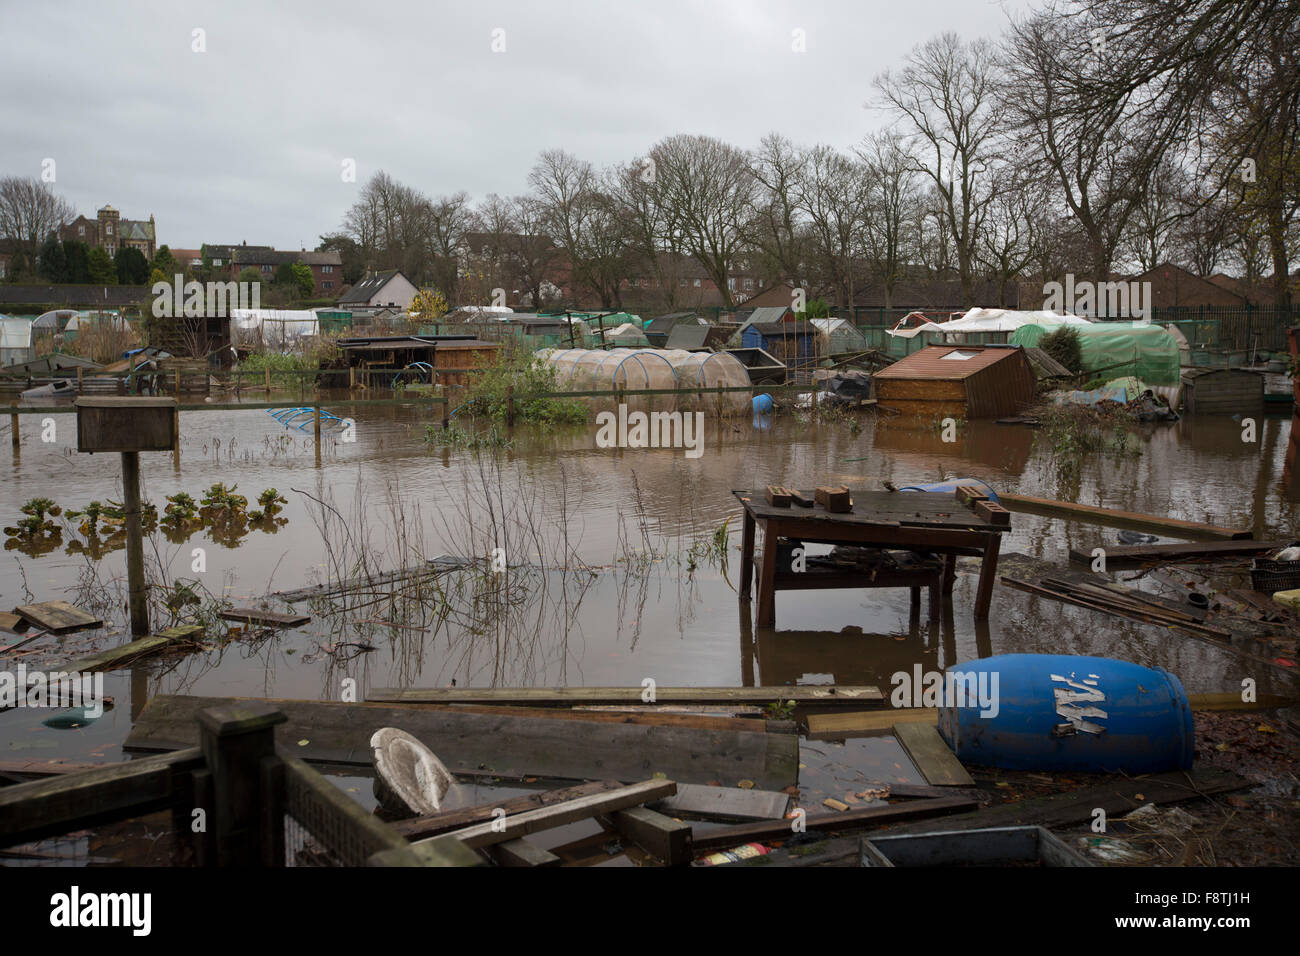 Allotment gardens inundated by flood water damaged by flooding in Carlisle at the beginning of December, 2015. Record rain fall in Cumbria caused flooding to several areas of Carlisle, causing houses to be evacuated by emergency services. Stock Photo